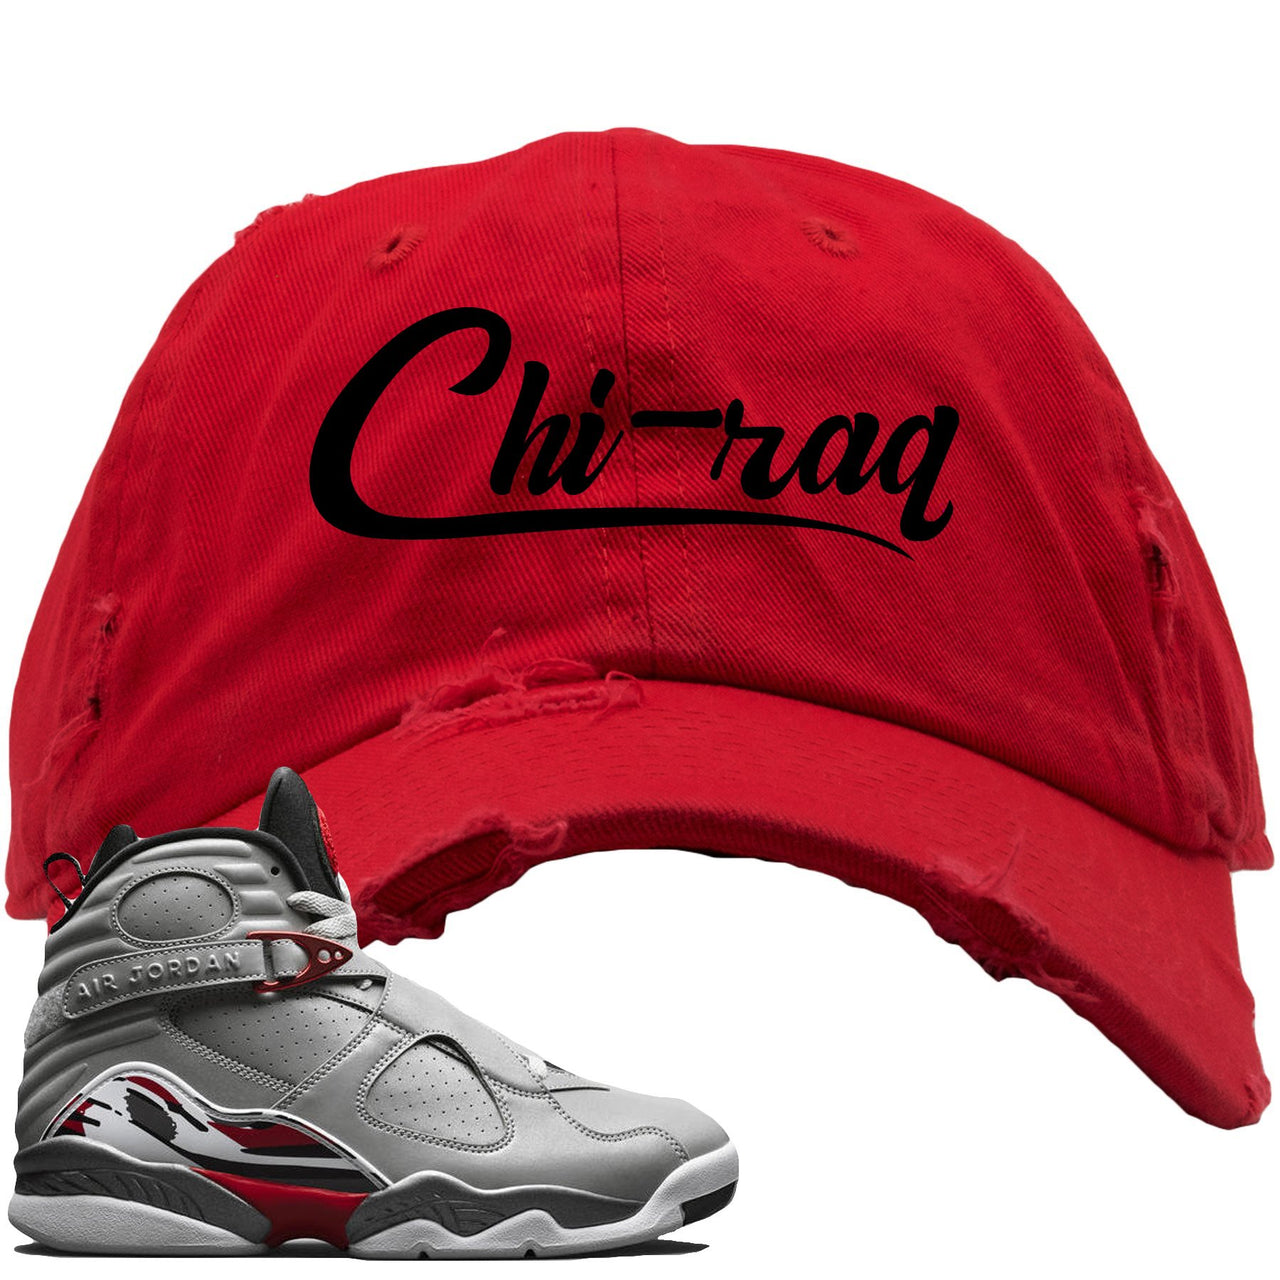 Reflections of a Champion 8s Distressed Dad Hat | Chiraq Script, Red